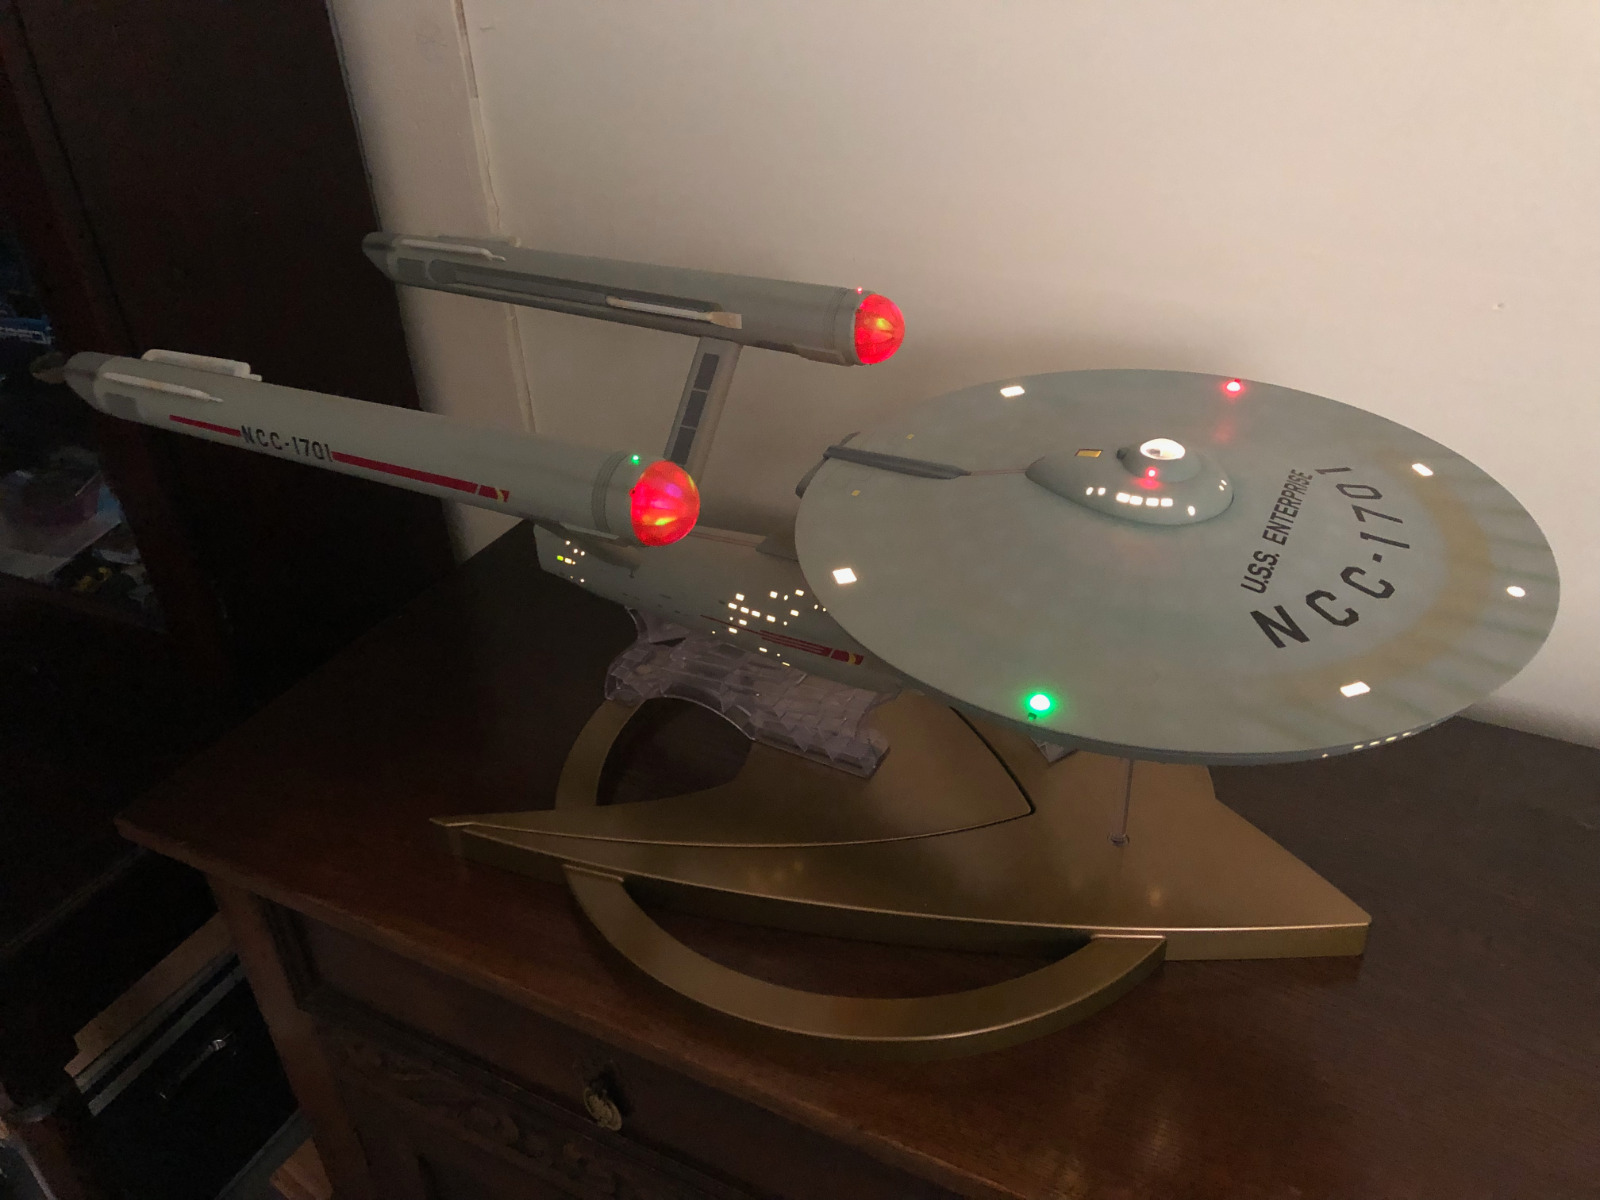 1/350 Scale Tomy Starship USS Enterprise. New in Sealed Box